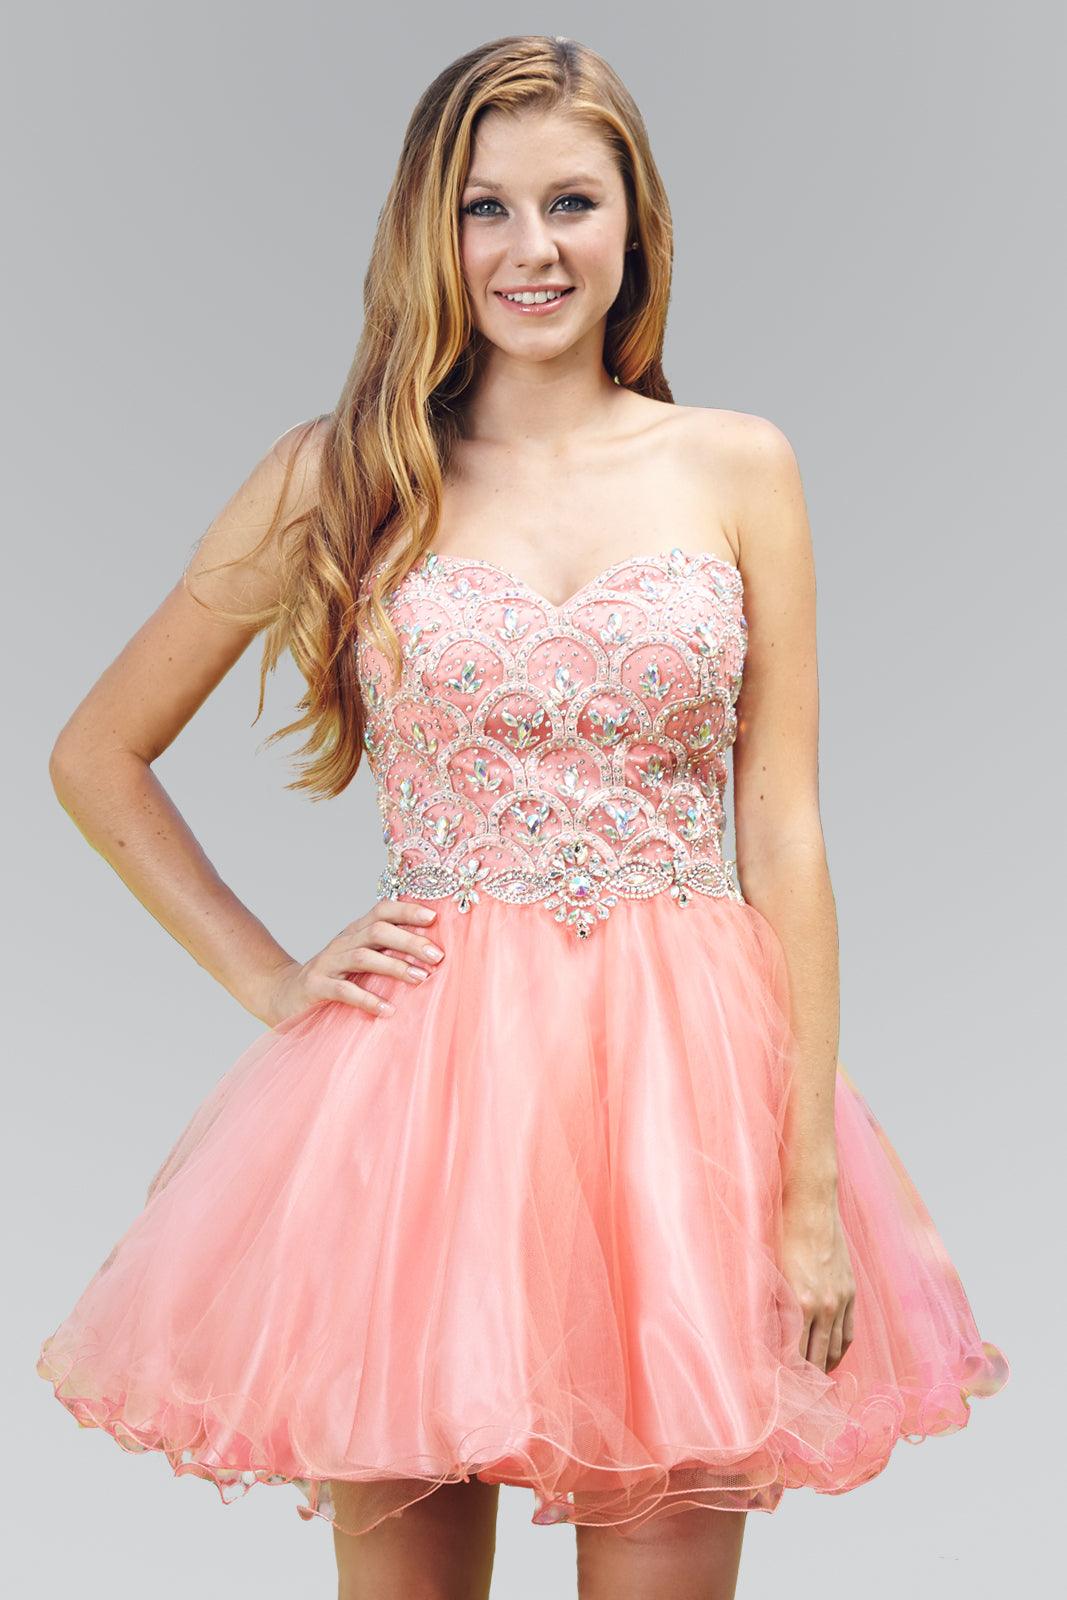 Homecoming Strapless Short Tulle Prom Dress - The Dress Outlet